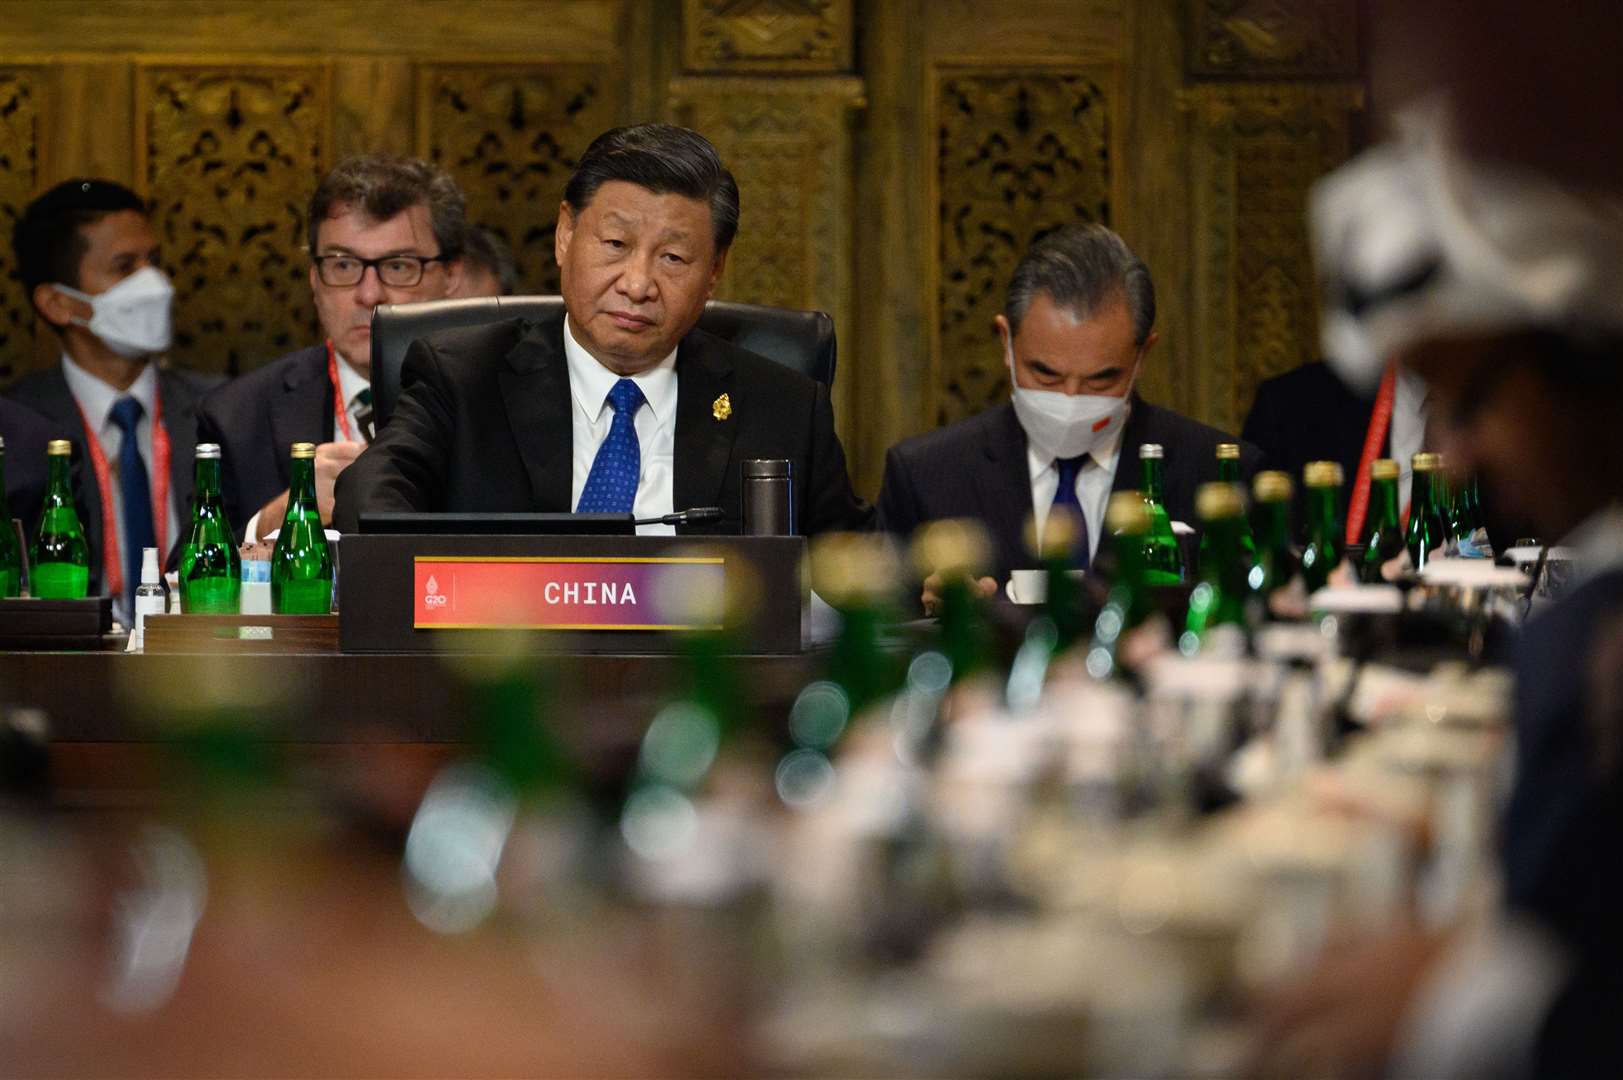 President Xi Jinping of China during the G20 Summit in 2022 (Leon Neal/PA)